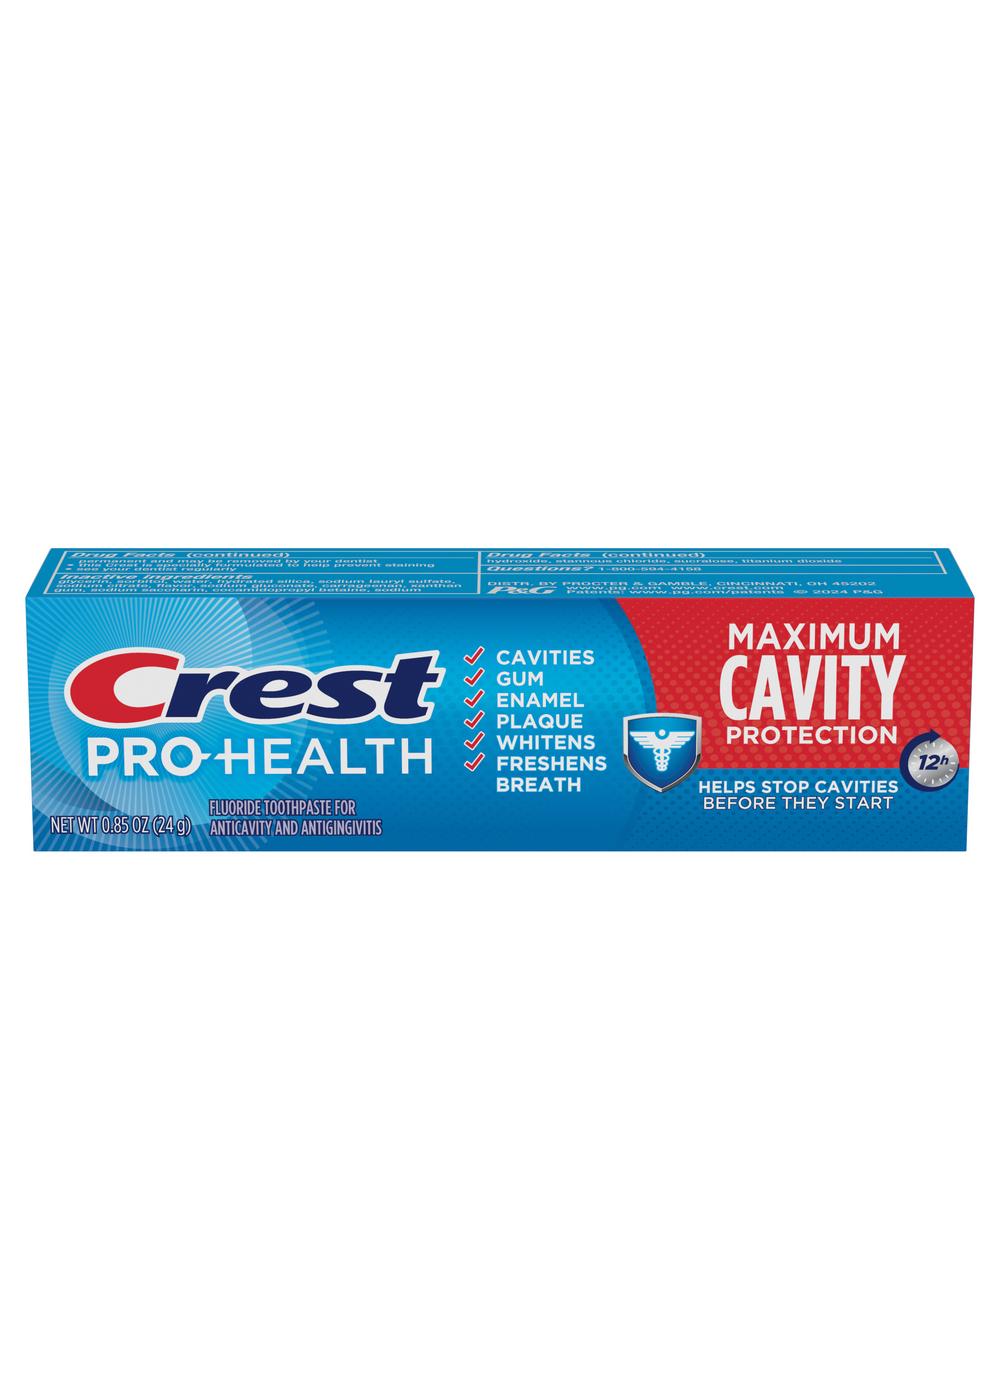 Crest Pro-Health Maximum Cavity Protection Toothpaste; image 1 of 9